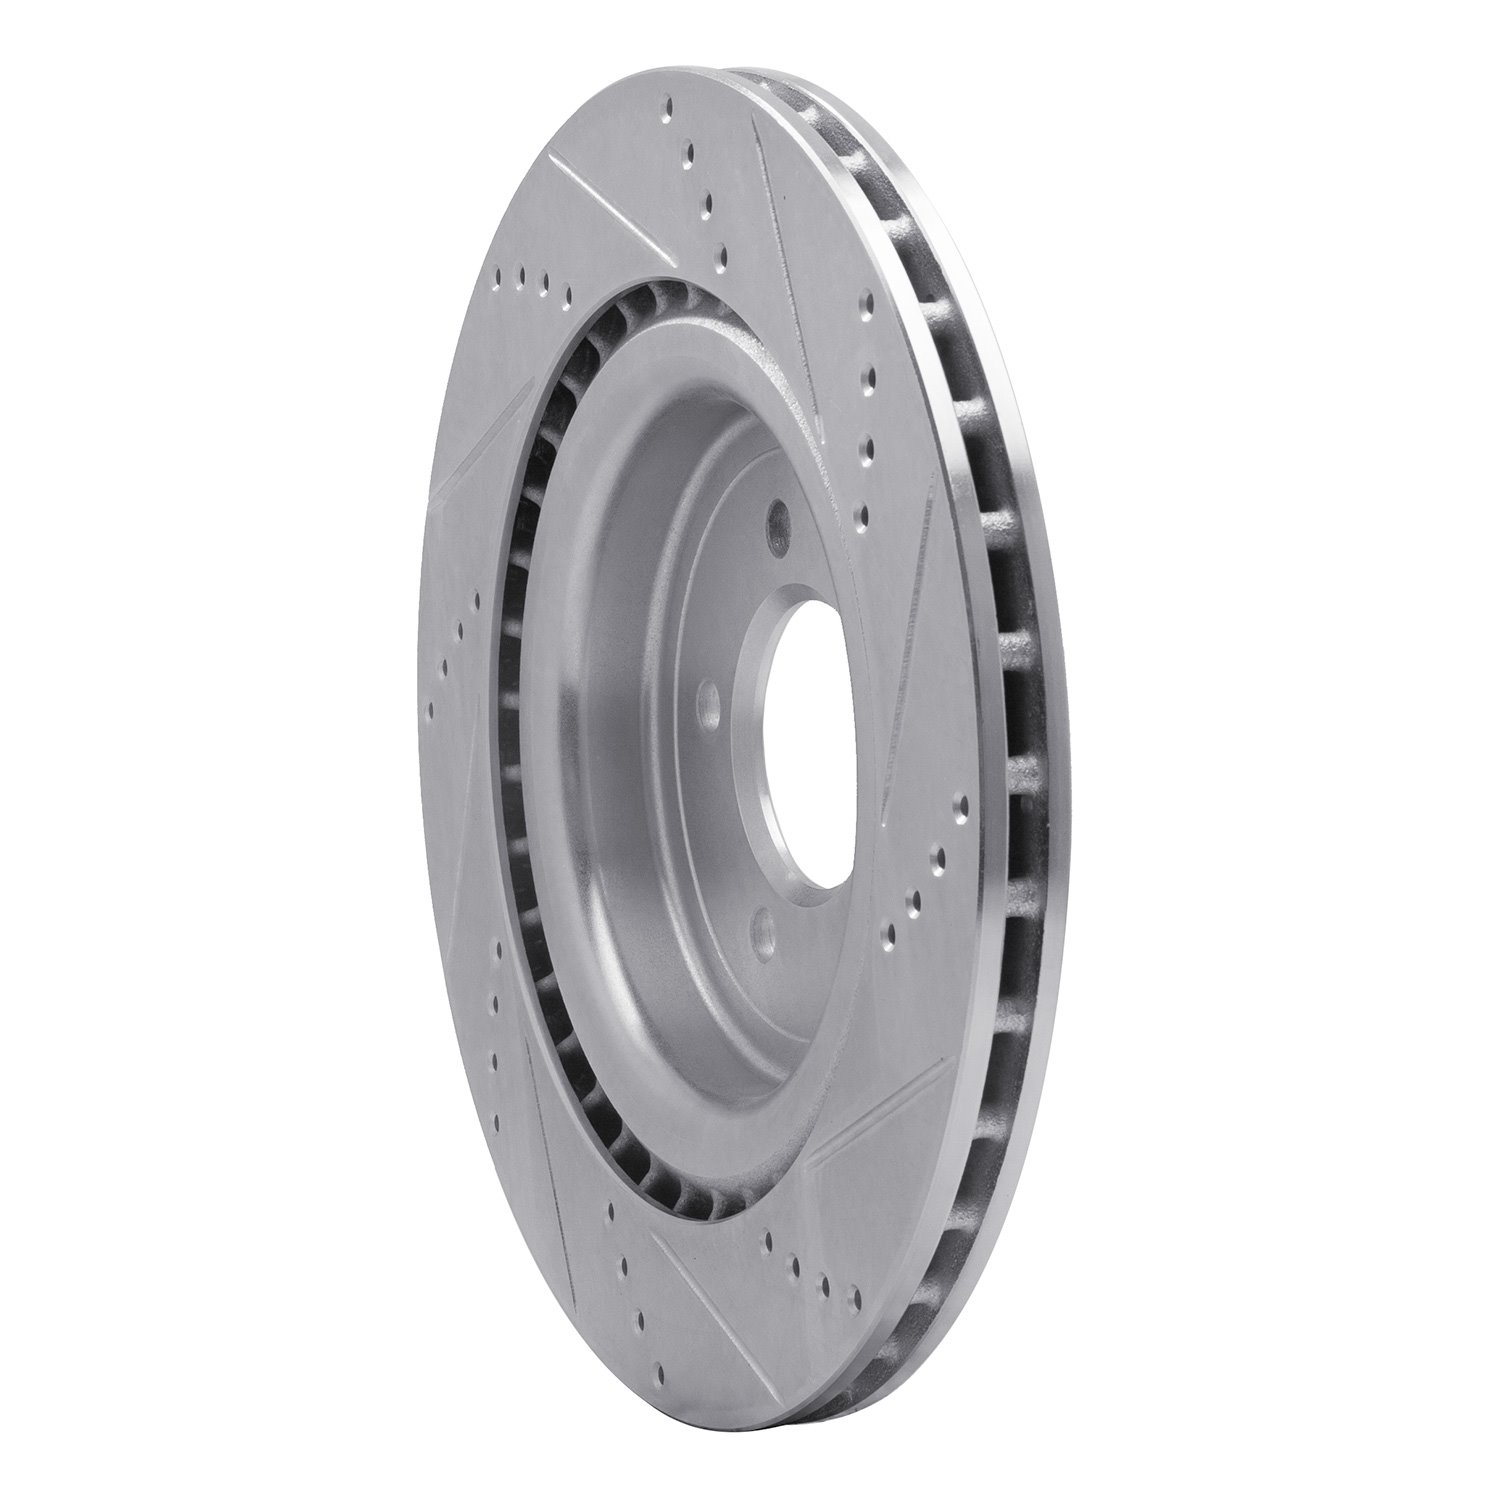 Drilled/Slotted Brake Rotor [Silver], Fits Select Land Rover